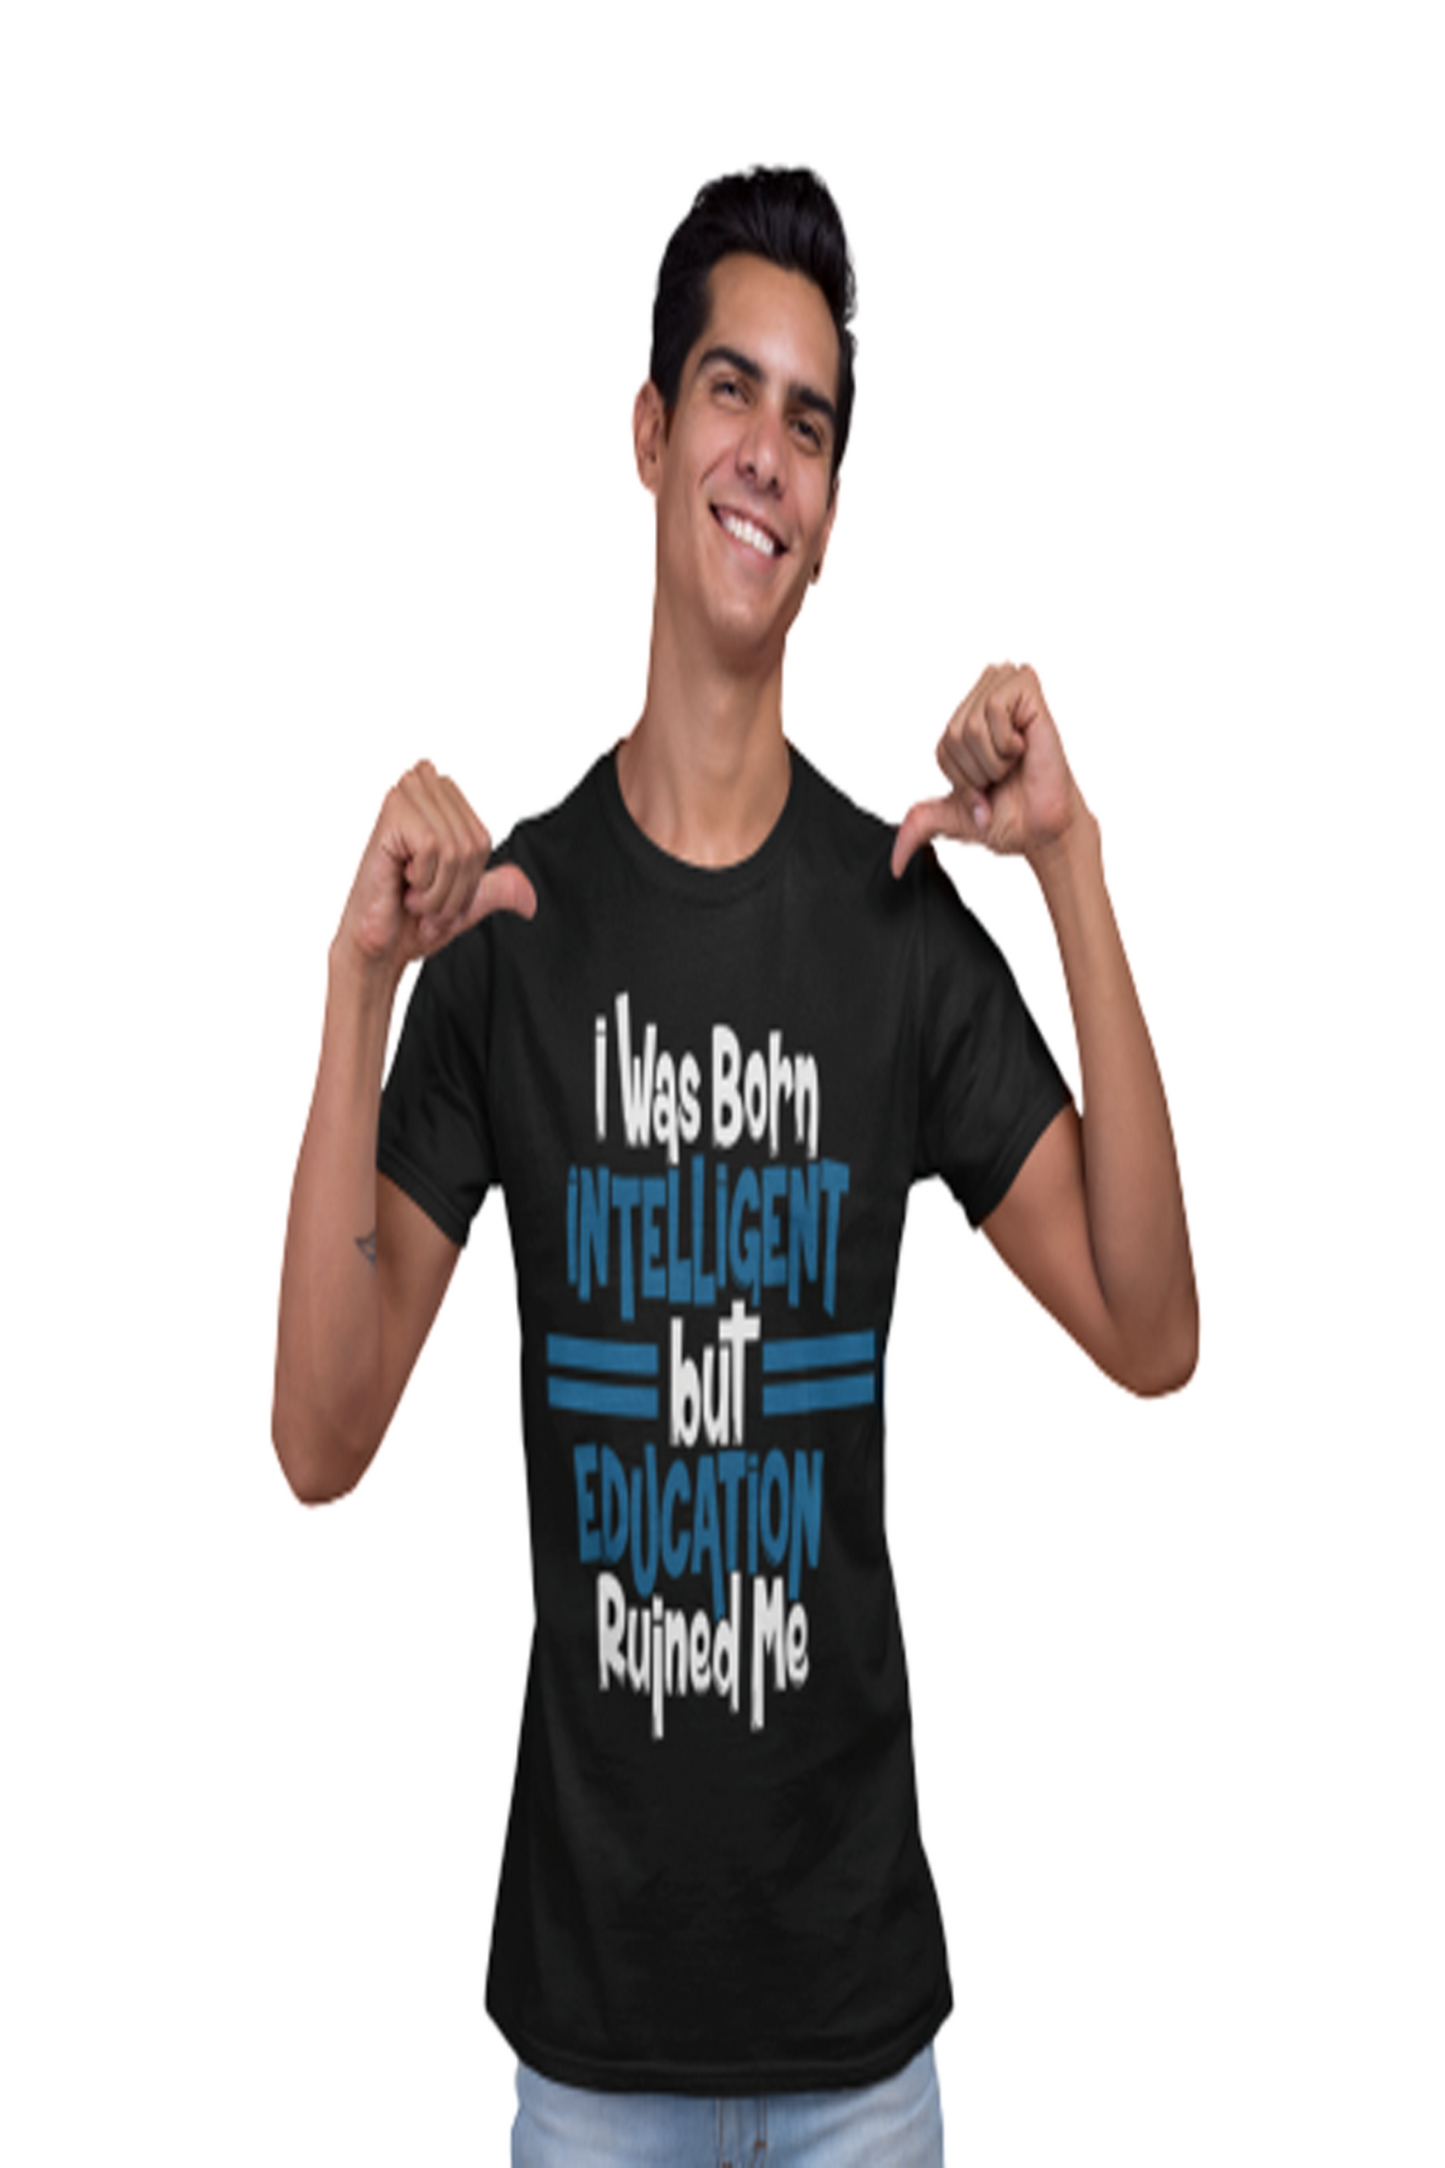 Men's Cotton Round Neck Half Sleeve T-Shirt | EDUCATION RUINED ME, front view